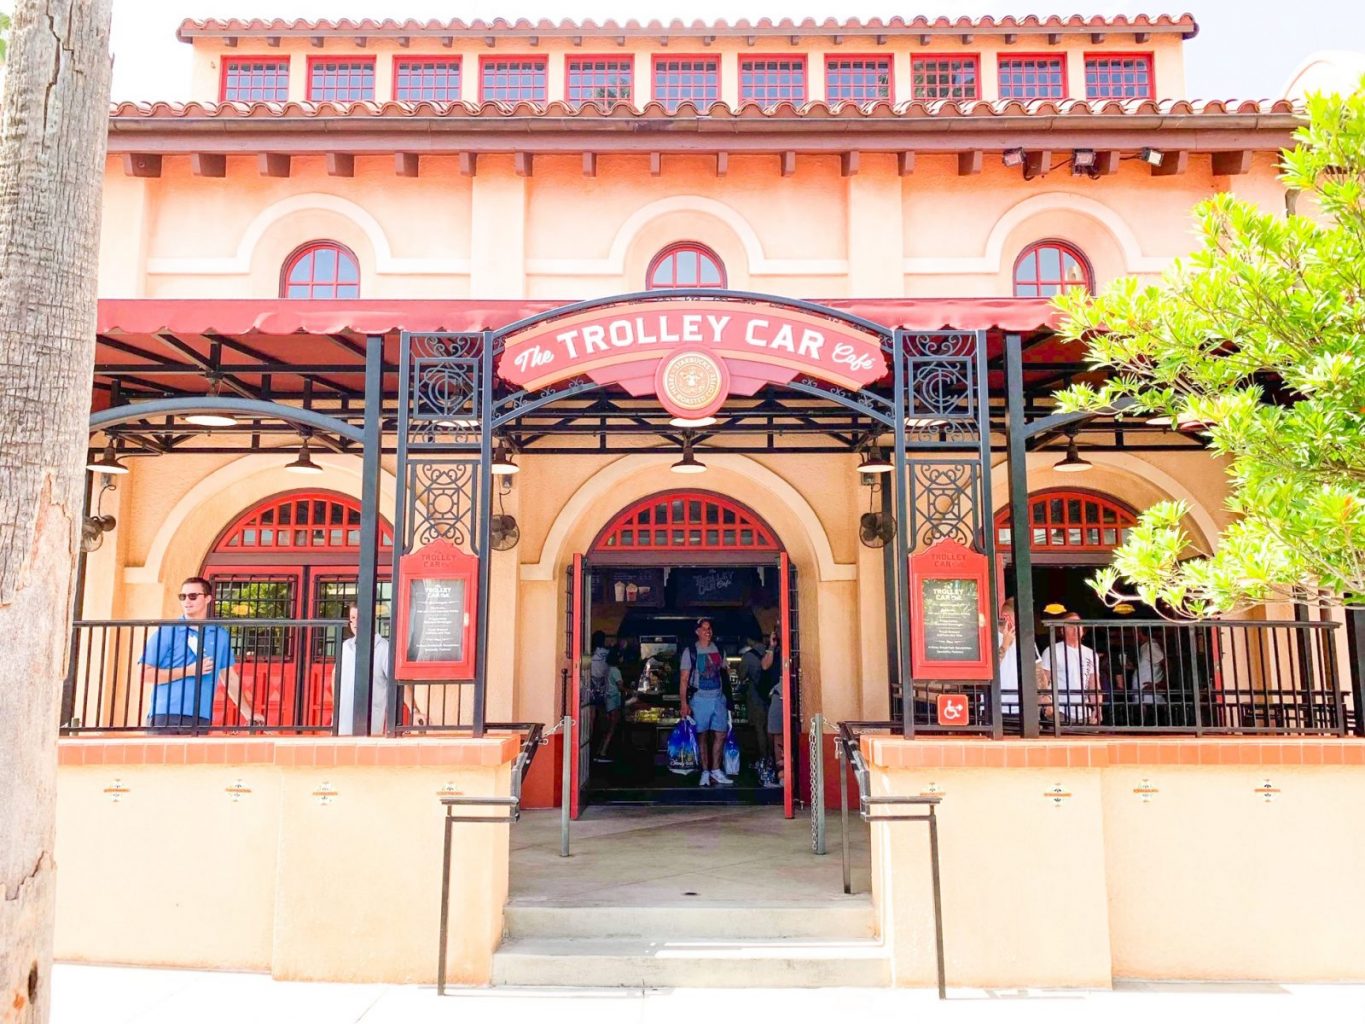 We see the front and entrance of the Trolley Cafe at Hollywood Studios, Walt Disney World. It is designed to look like a golden age trolley station. with tall walls and arched doors and windows.